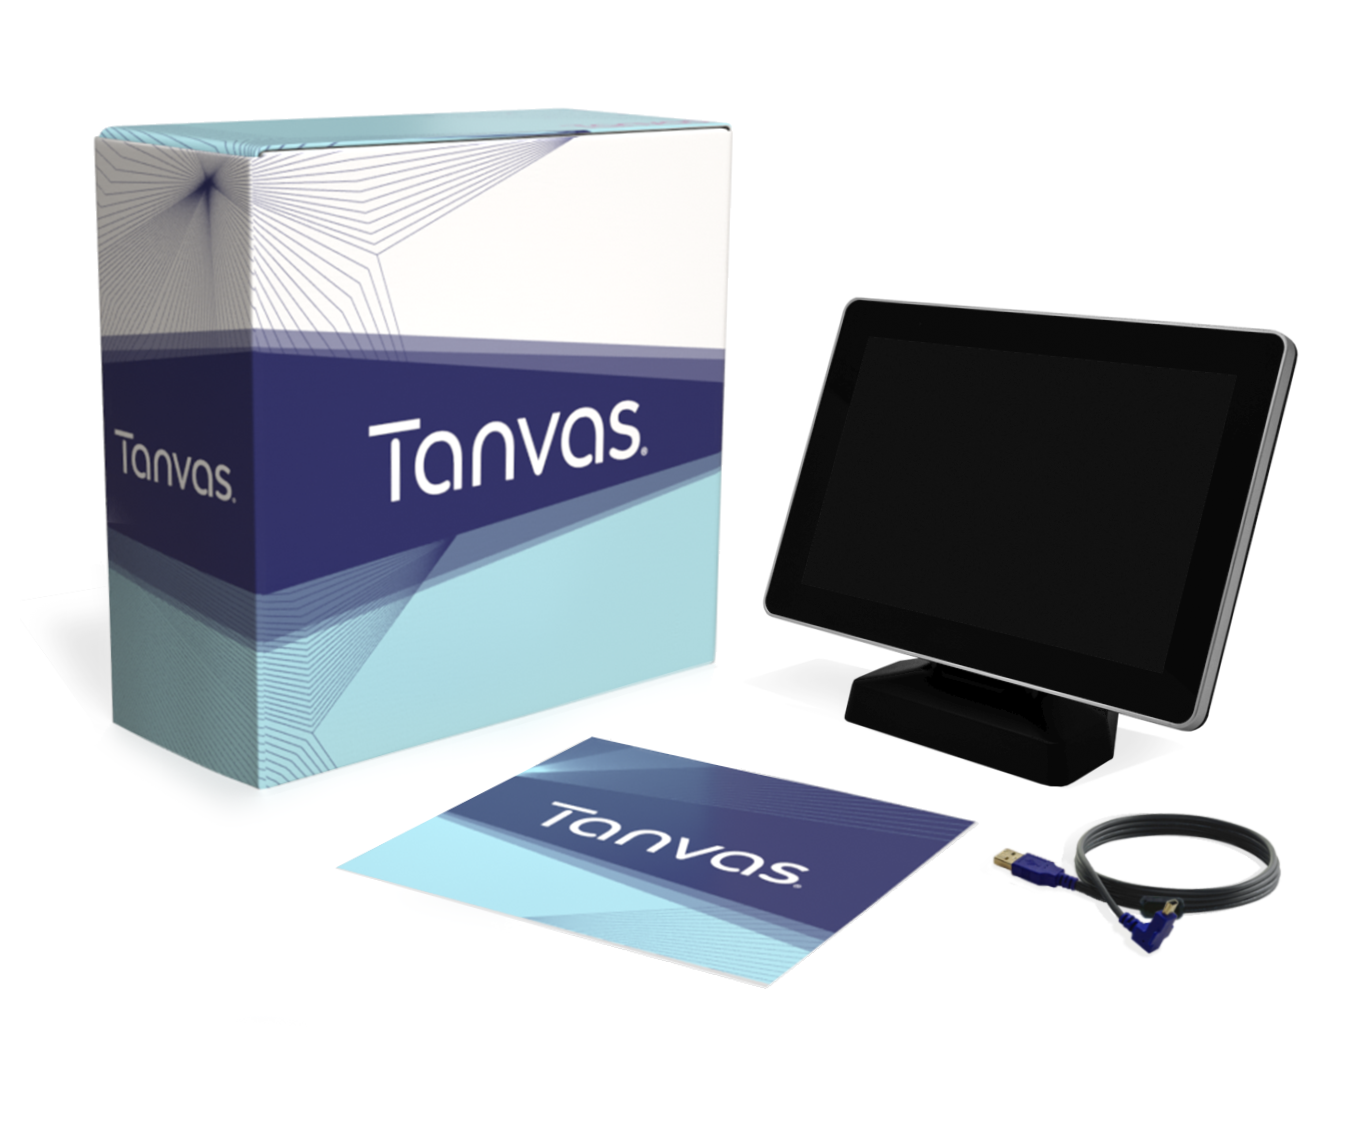 Tanvas dev kit with 10.1" monitor pictures, box, cord and cleaning cloth